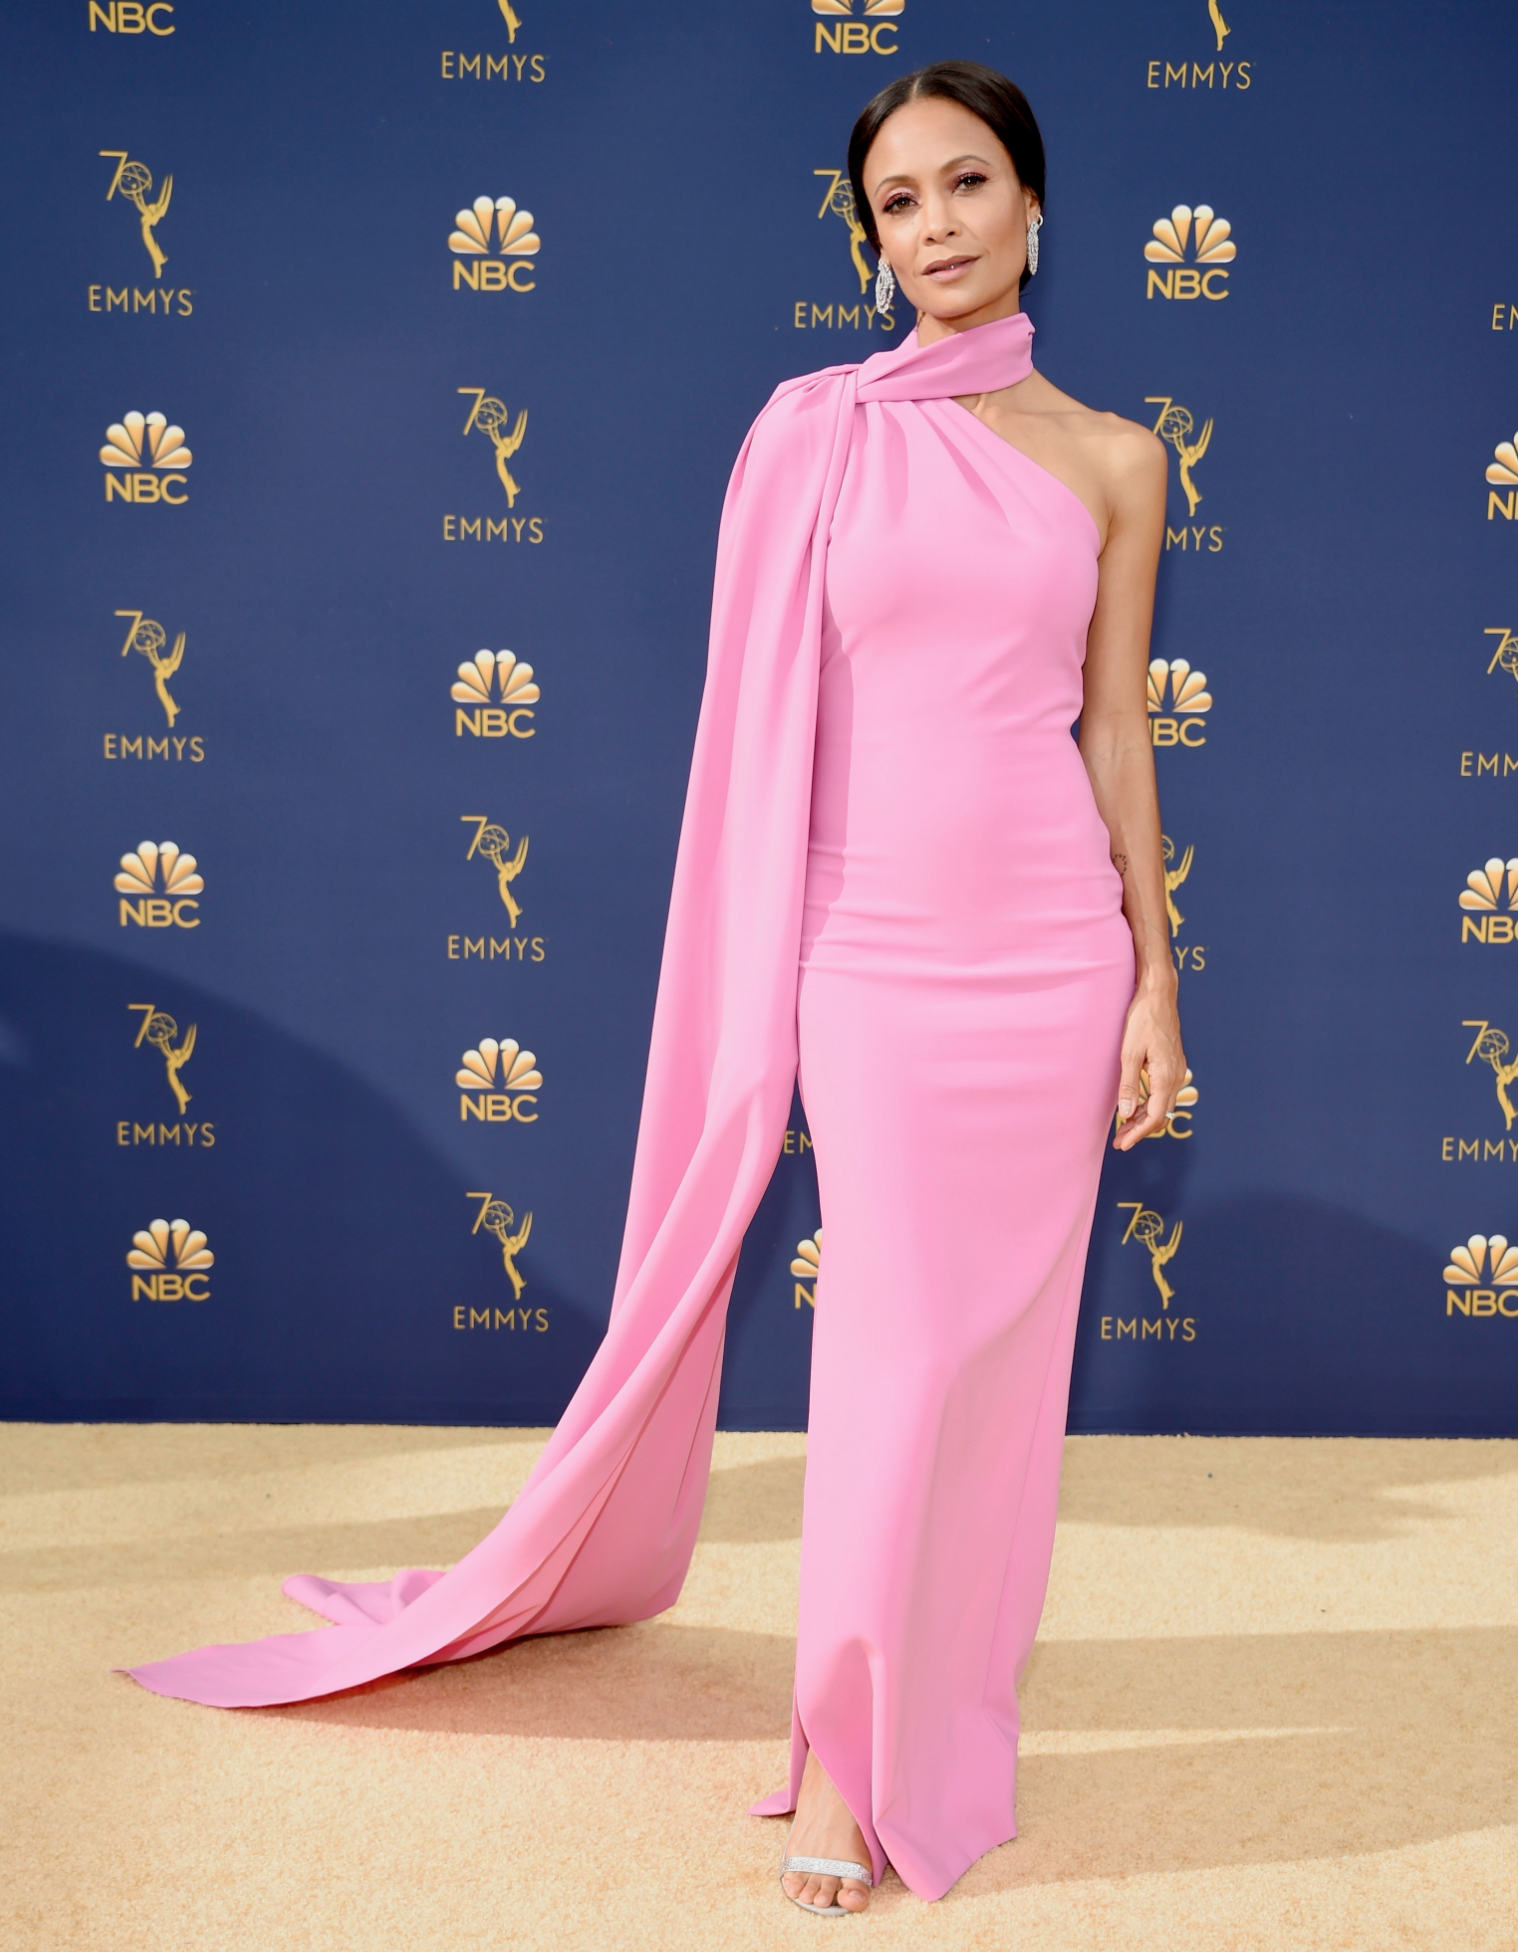 Best Dressed at the Emmys